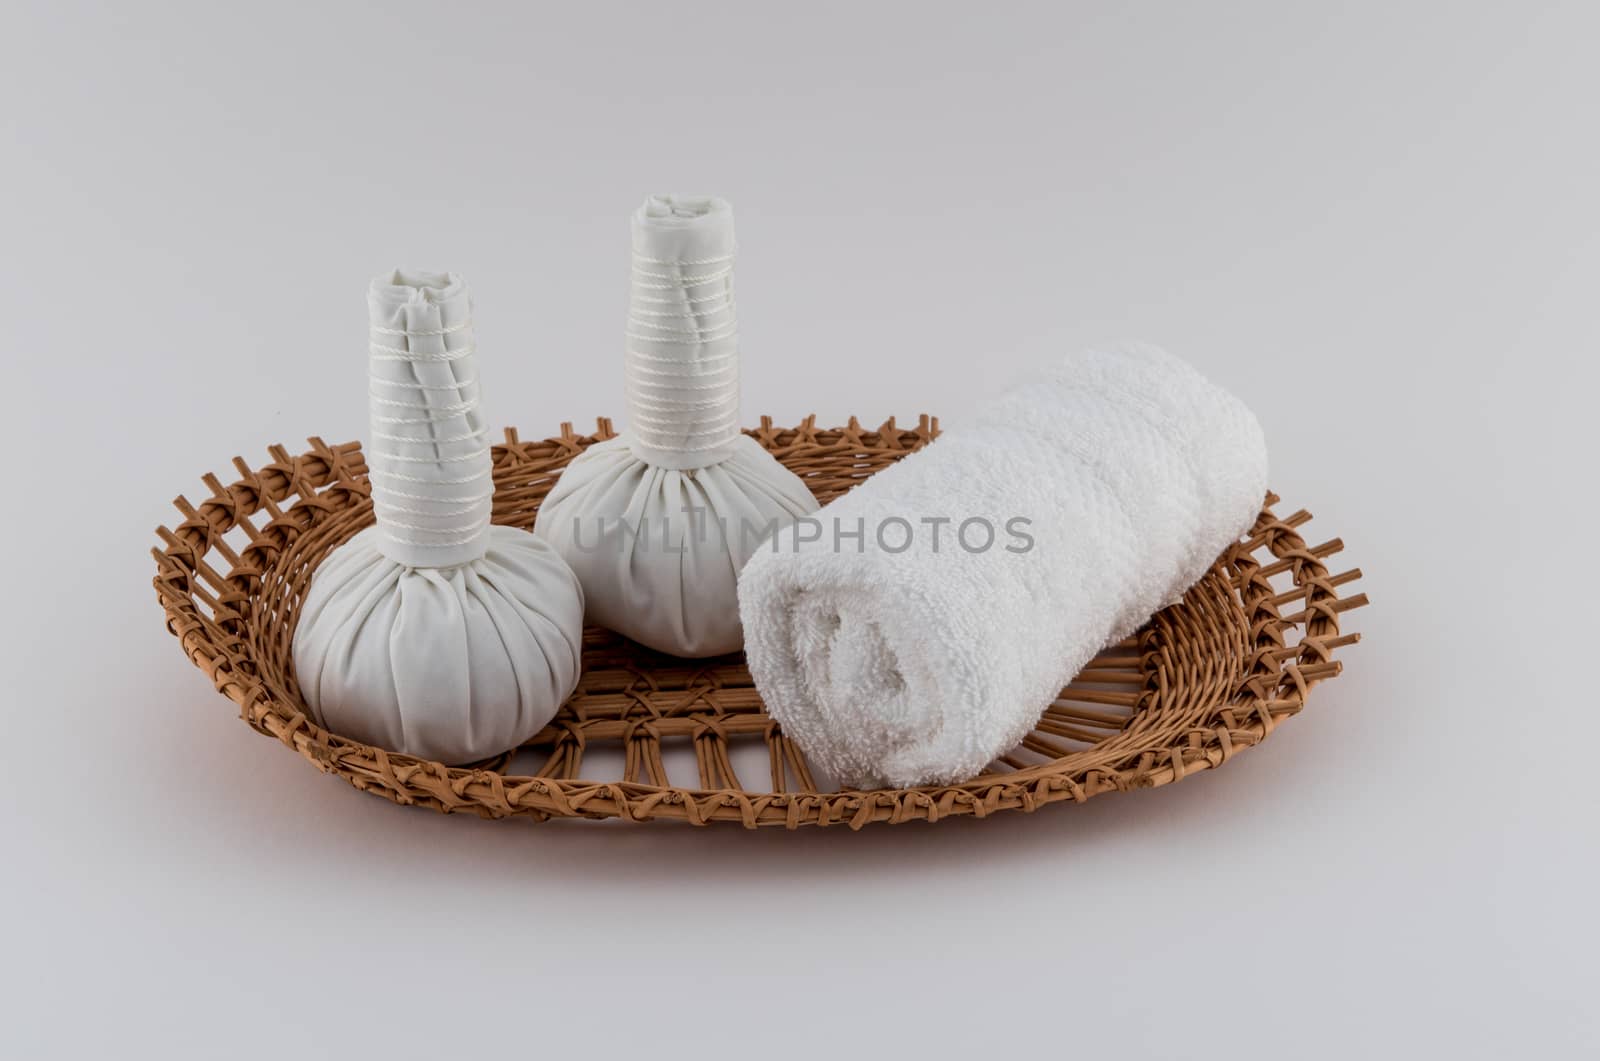 Herbal Massage Balls and Spa Towel by krisblackphotography